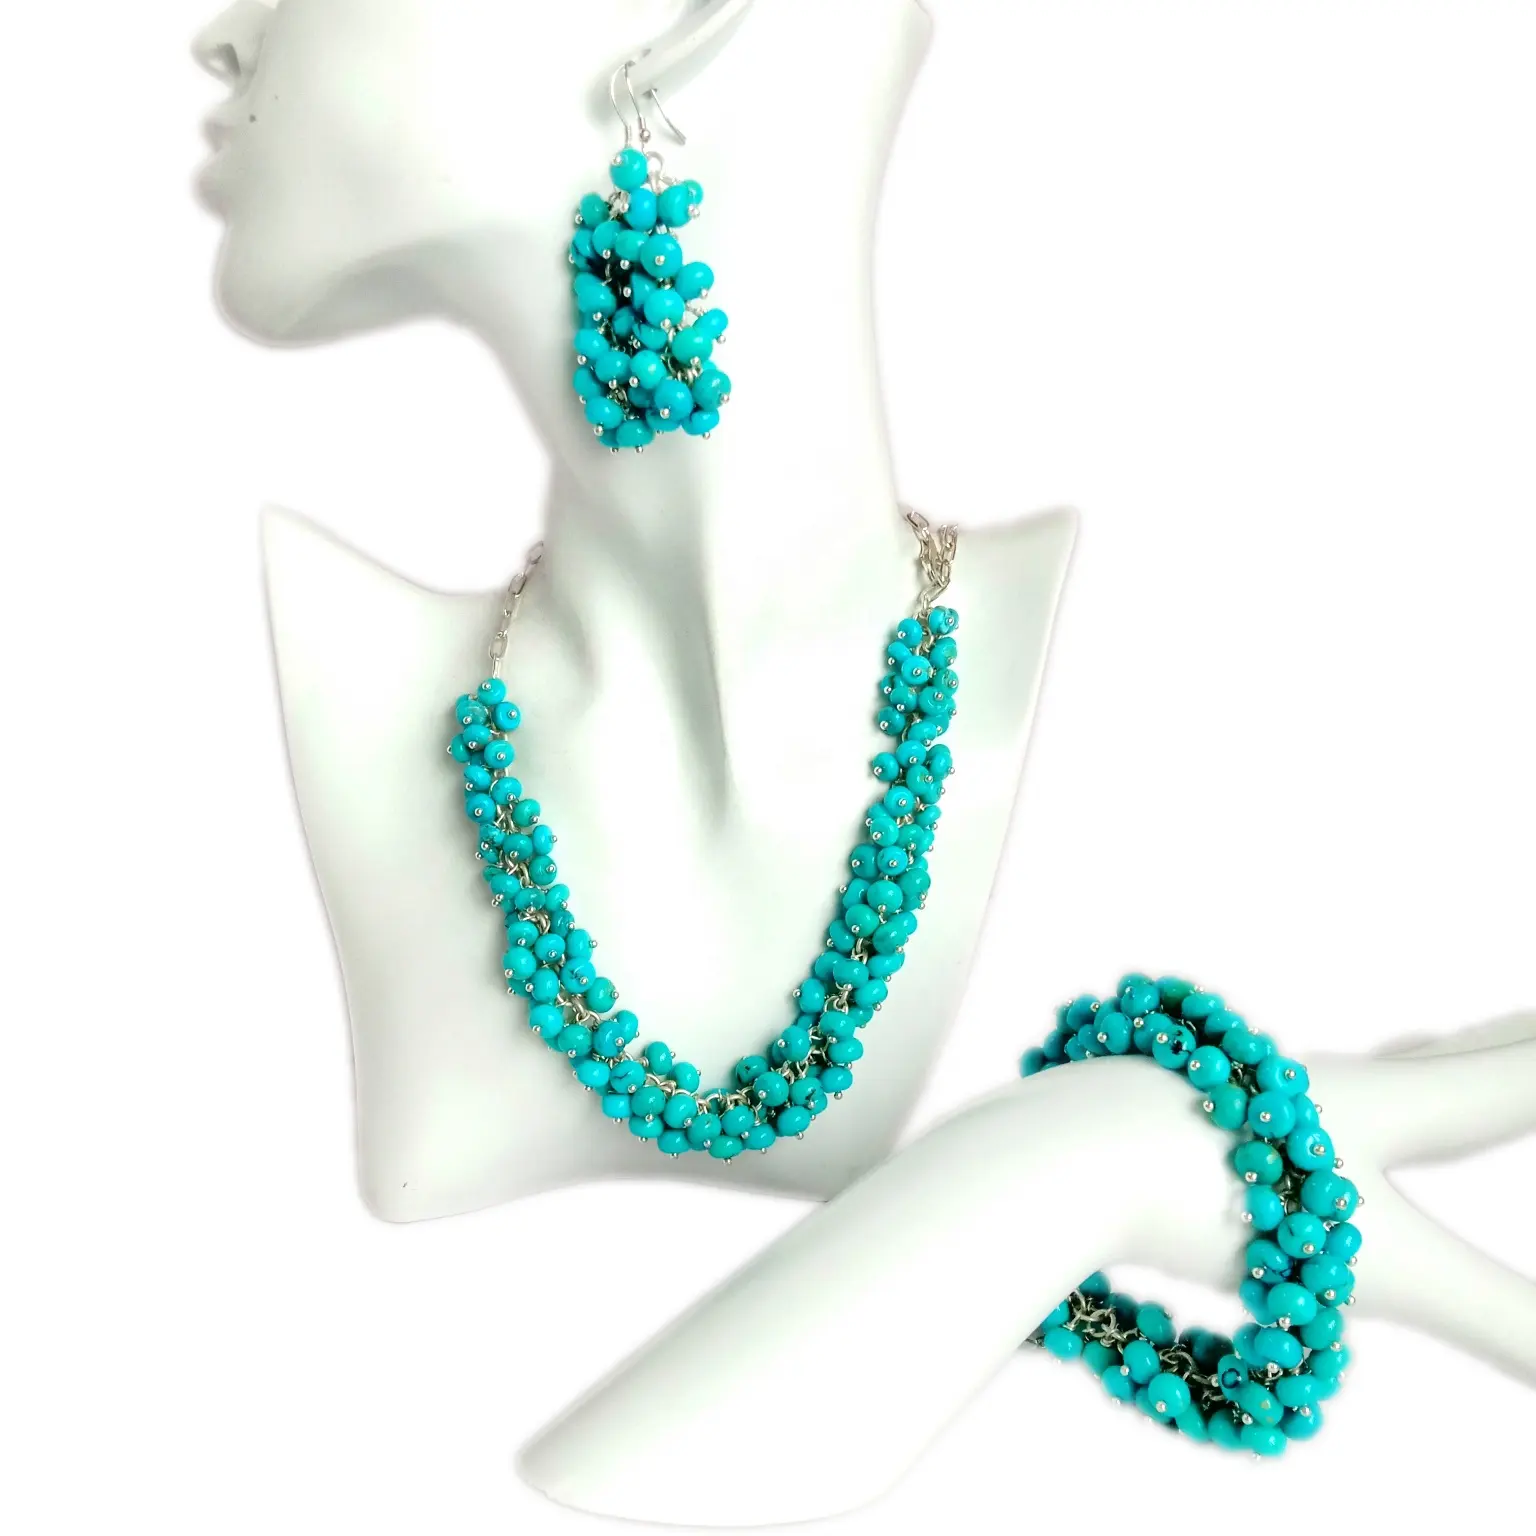 Beautiful grape chain set bracelet necklace earrings made of blue turquoise beads